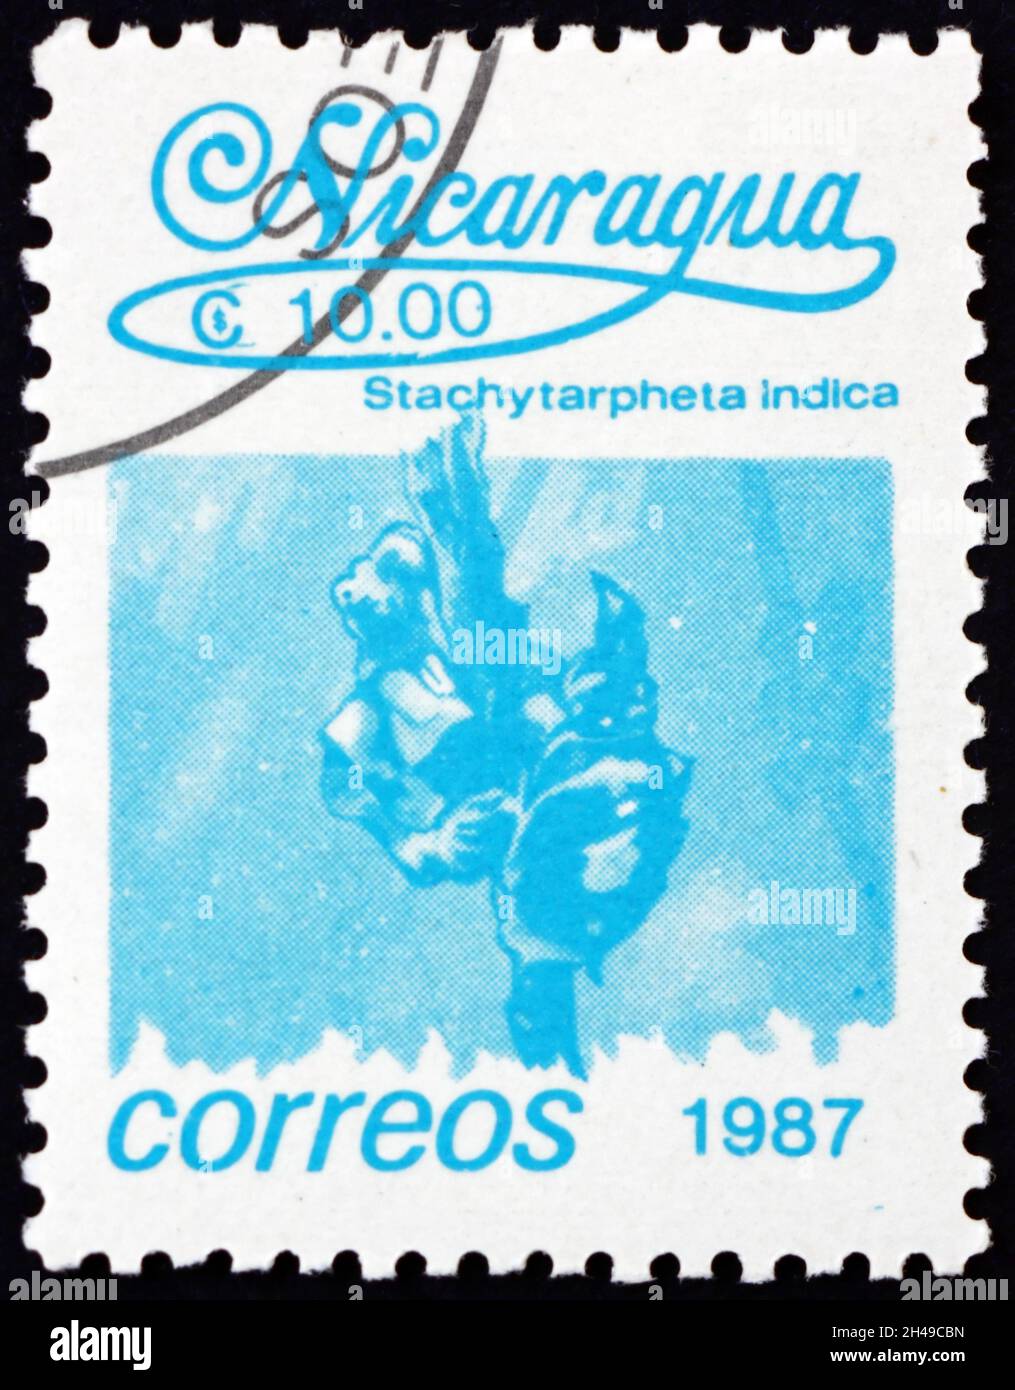 NICARAGUA - CIRCA 1987: a stamp printed in Nicaragua shows stachytarpheta indica, is a plant native to the tropical Americas, circa 1987 Stock Photo